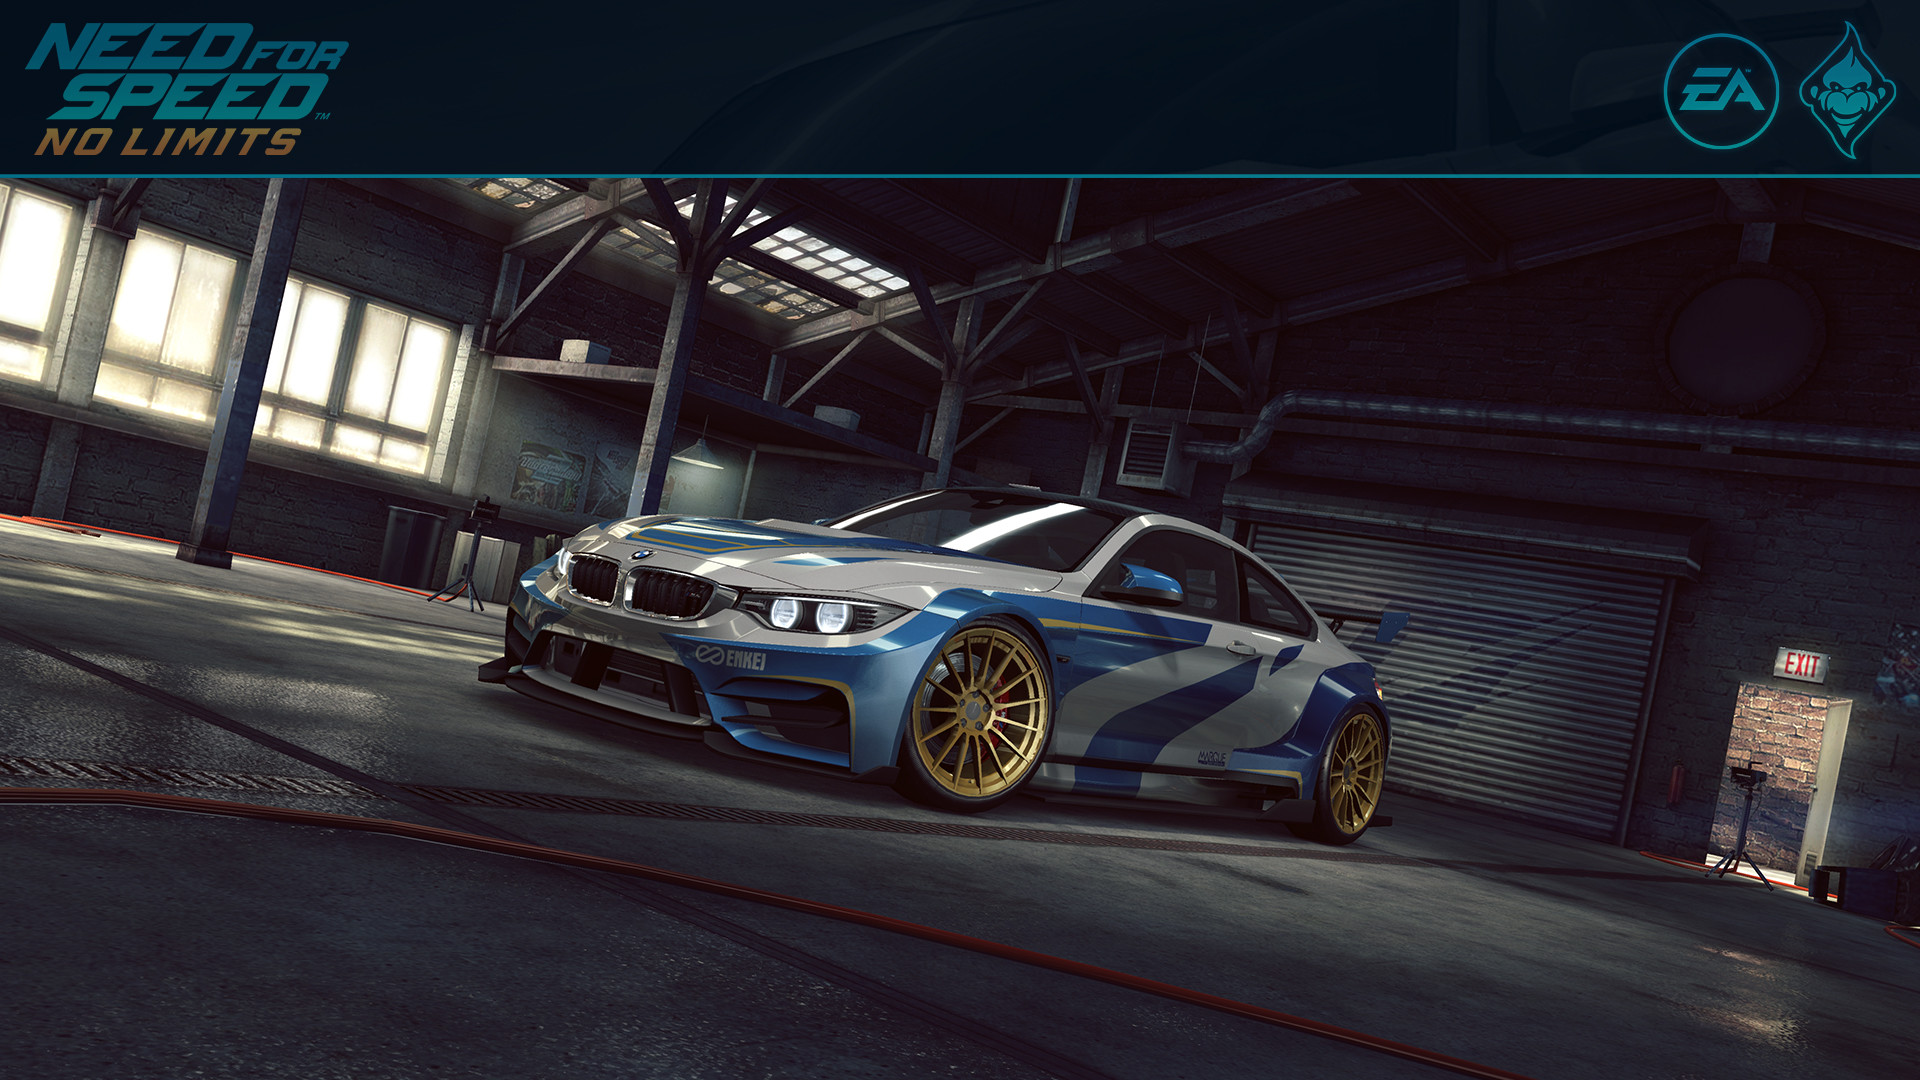 Need For Speed No Limits Video Games Car Vehicle Garages BMW M4 Tuning Need For Speed Colored Wheels 1920x1080